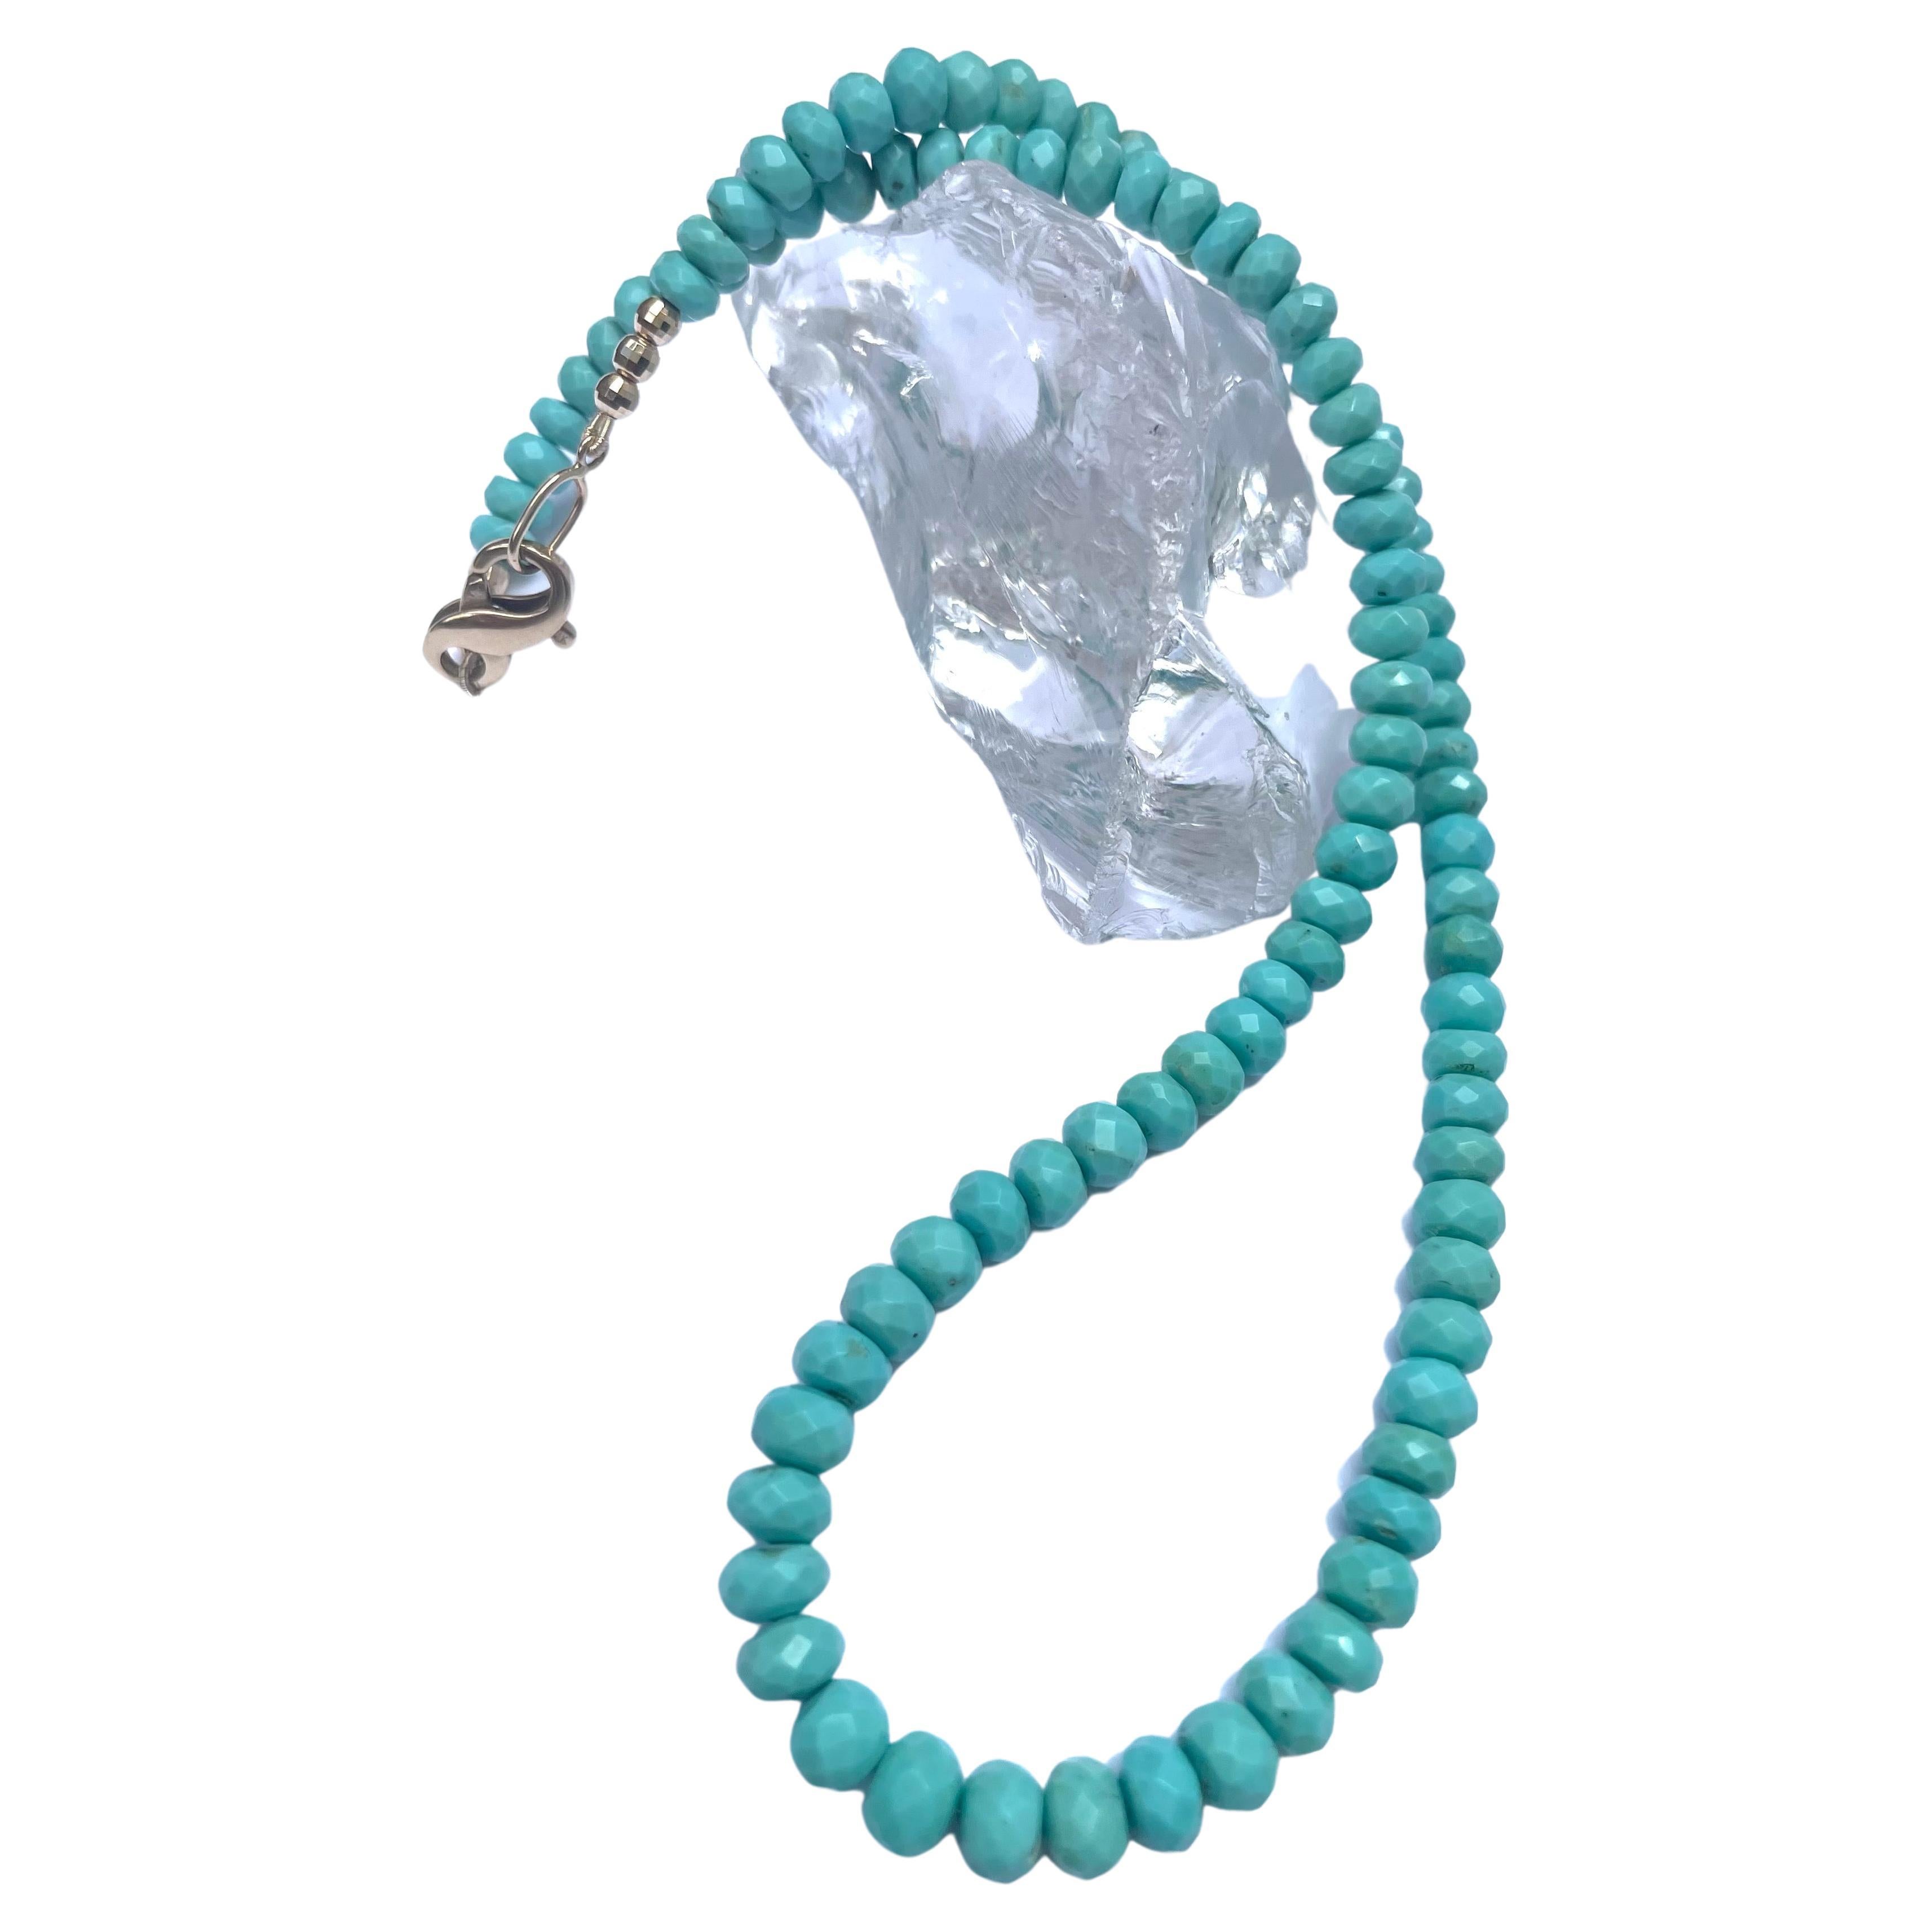 Description
Exquisite Sleeping Beauty turquoise necklace accented with 14k yellow gold faceted round beads adorning an easy to use clasp. 
Item # N3845

Materials and Weight
Sleeping Beauty turquoise 79 carats, 5-6mm, faceted rondelle shape
Faceted